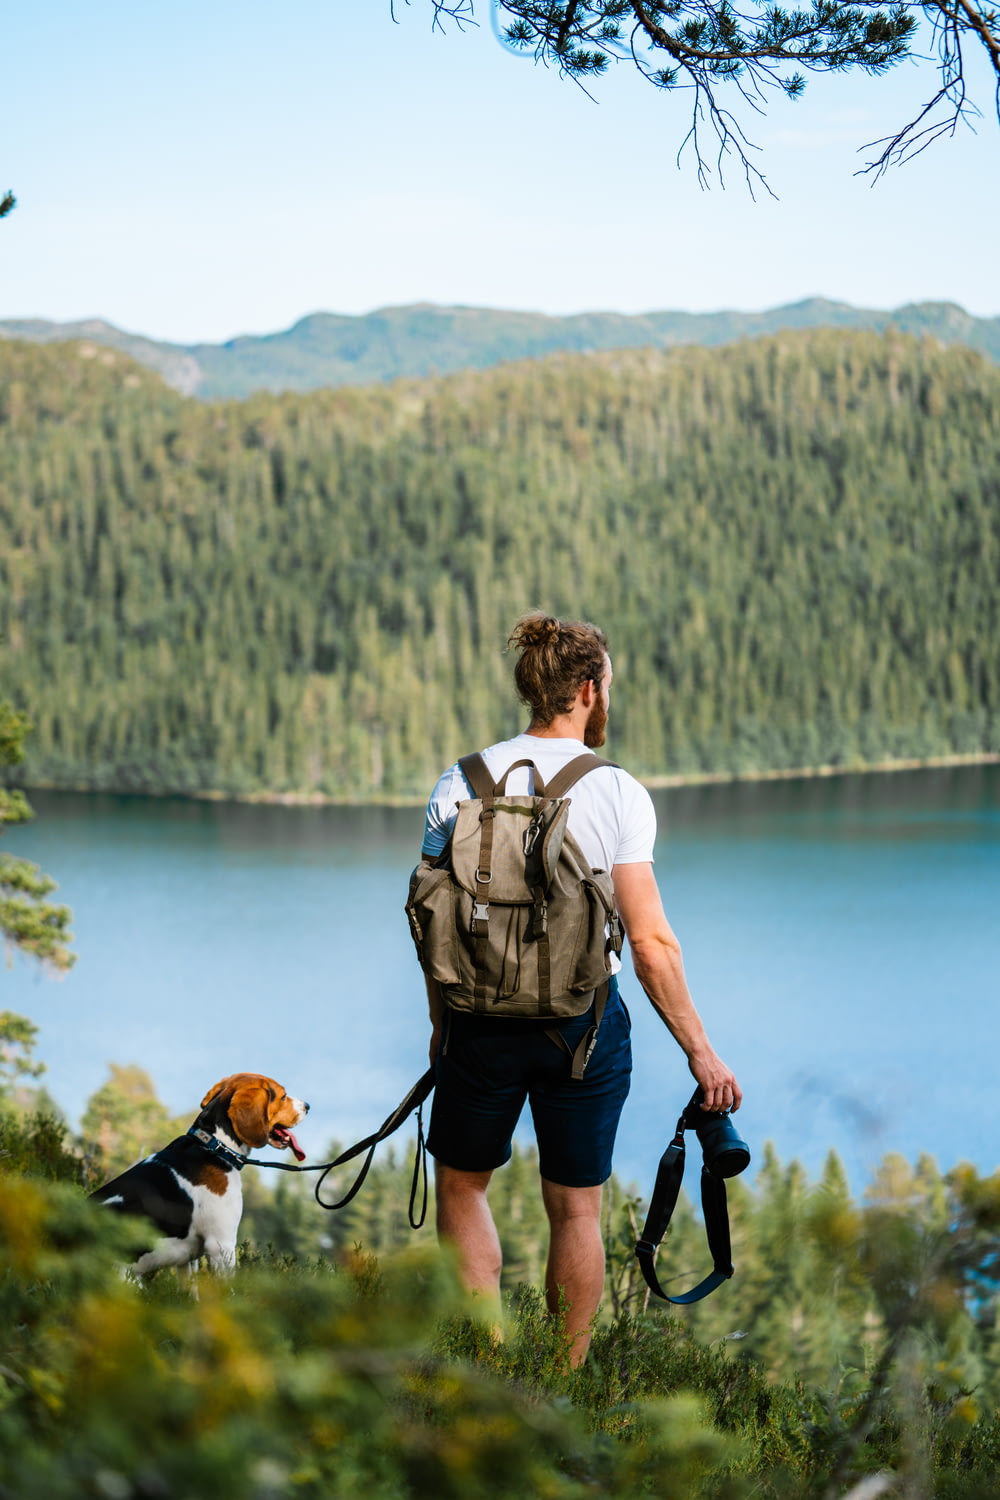 a person with a dog on a leash by a lake